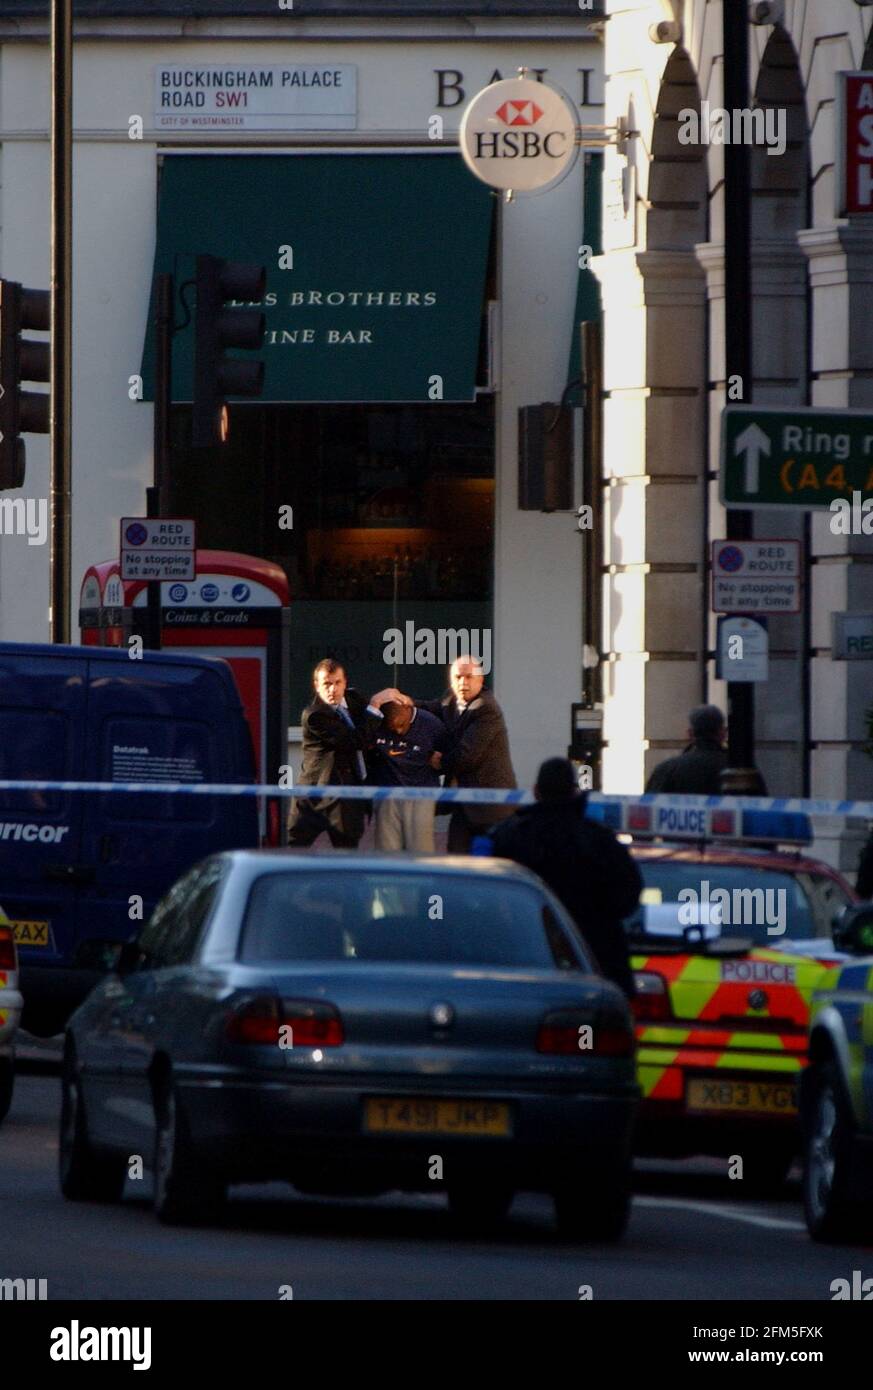 Police escorting an individual from the HSBC Bank on Buckingham Palace Road this afternoon after an unsuccessful hold up was foiled. Another member was apprehended earlier and arrested. 5 December 2002 photo Andy Paradise Stock Photo